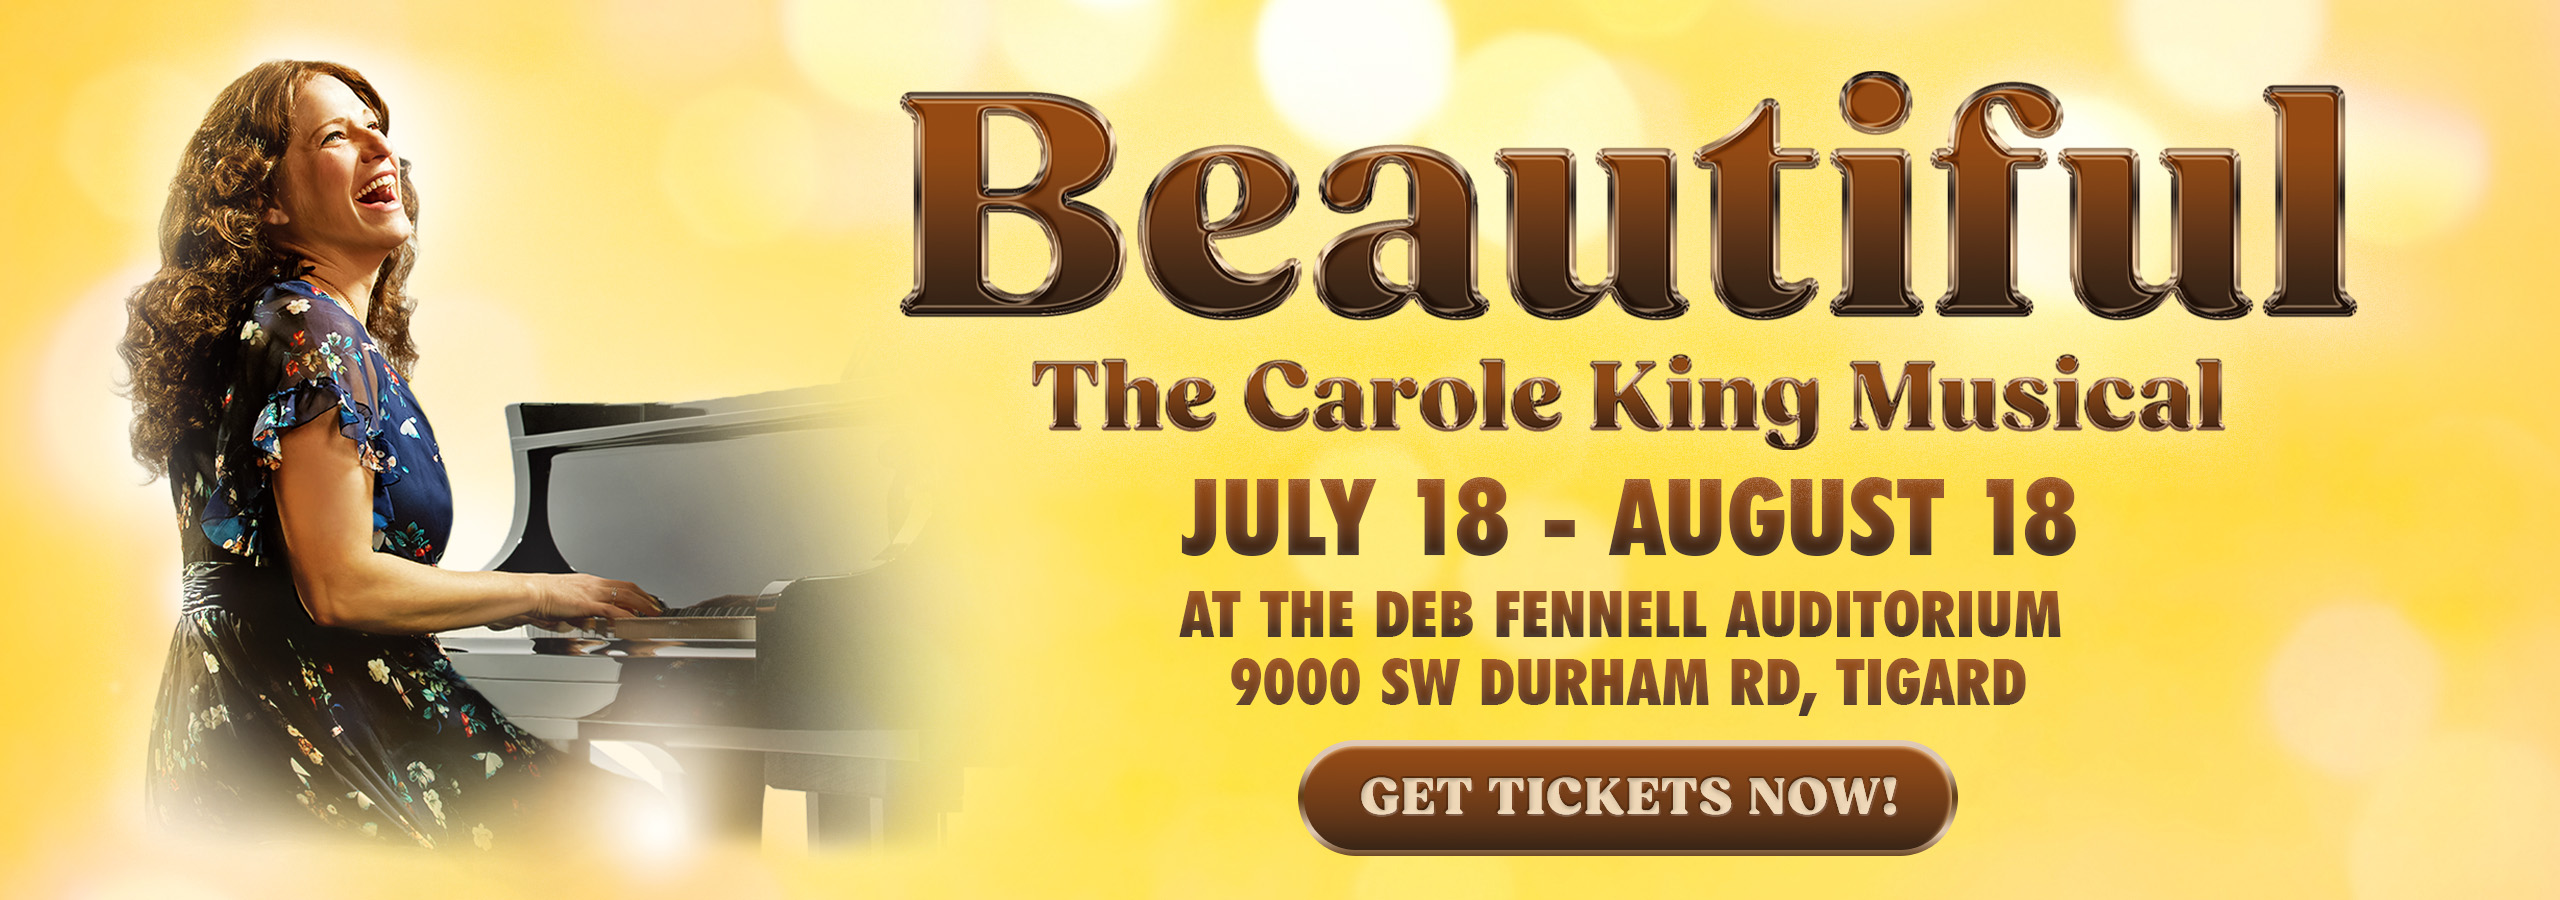 Beautiful, the Carole King musical. July 18 to August 18 at the Deb Fennell Auditorium. Click here for tickets.